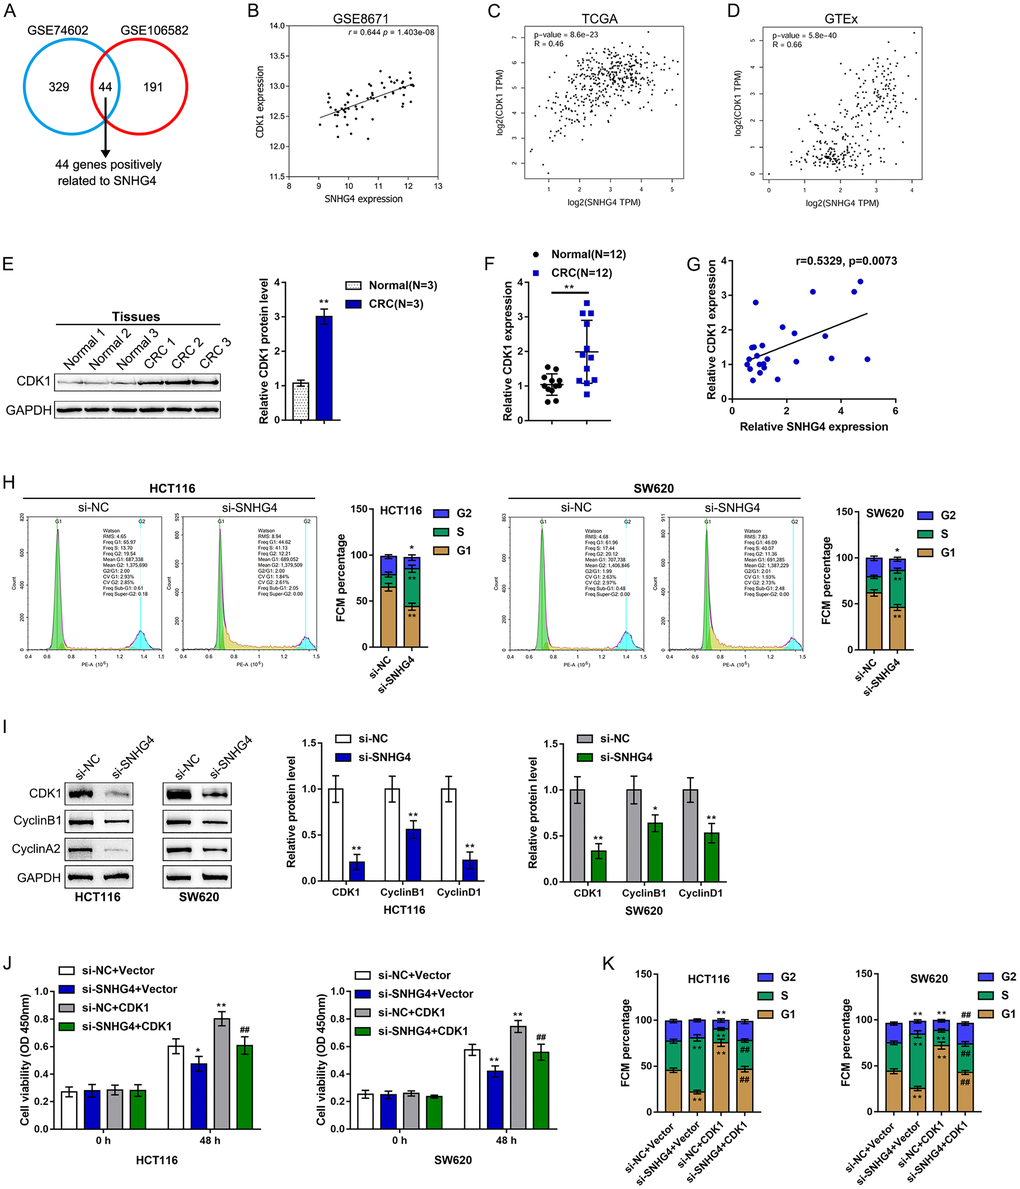 SNHG4 is correlated with cyclin-dependent kinase 1 (CDK1) and the CRC cell cycle. (A) Samples in GSE106582 and GSE74602 were divided into high SNHG4 expression and low SNHG4 expression groups. The correlation between SNHG4 and differentially expressed genes was analyzed to identify genes that are significantly positively correlated with SNHG4 (r > 0.40, p B–D) Correlation of the SNHG4 and CDK1 expression levels based on data from GSE8671, TCGA, and GTEx. (E) The protein levels of CDK1 in tissue samples as determined by immunoblotting. (F) The expression of CDK1 in tissue samples as determined by real-time PCR. (G) The correlation between the SNHG4 and CDK1 expression levels as determined by Pearson’s correlation analysis. (H) HCT116 and SW620 cells were transfected with si-SNHG4, and the cell cycle was examined by flow cytometry. (I) HCT116 and SW620 cells were transfected with si-SNHG4, and the protein levels of CDK1, cyclin B1, and cyclin A2 were examined. (J) HCT116 and SW620 cells were transfected with si-SNHG4 and/or CDK1 overexpression vector, and cell proliferation was examined by CCK-8 assay. (K) HCT116 and SW620 cells were transfected with si-SNHG4 and/or CDK1 overexpression vector, and cell cycle progression was examined by flow cytometry. *P **P ##P 